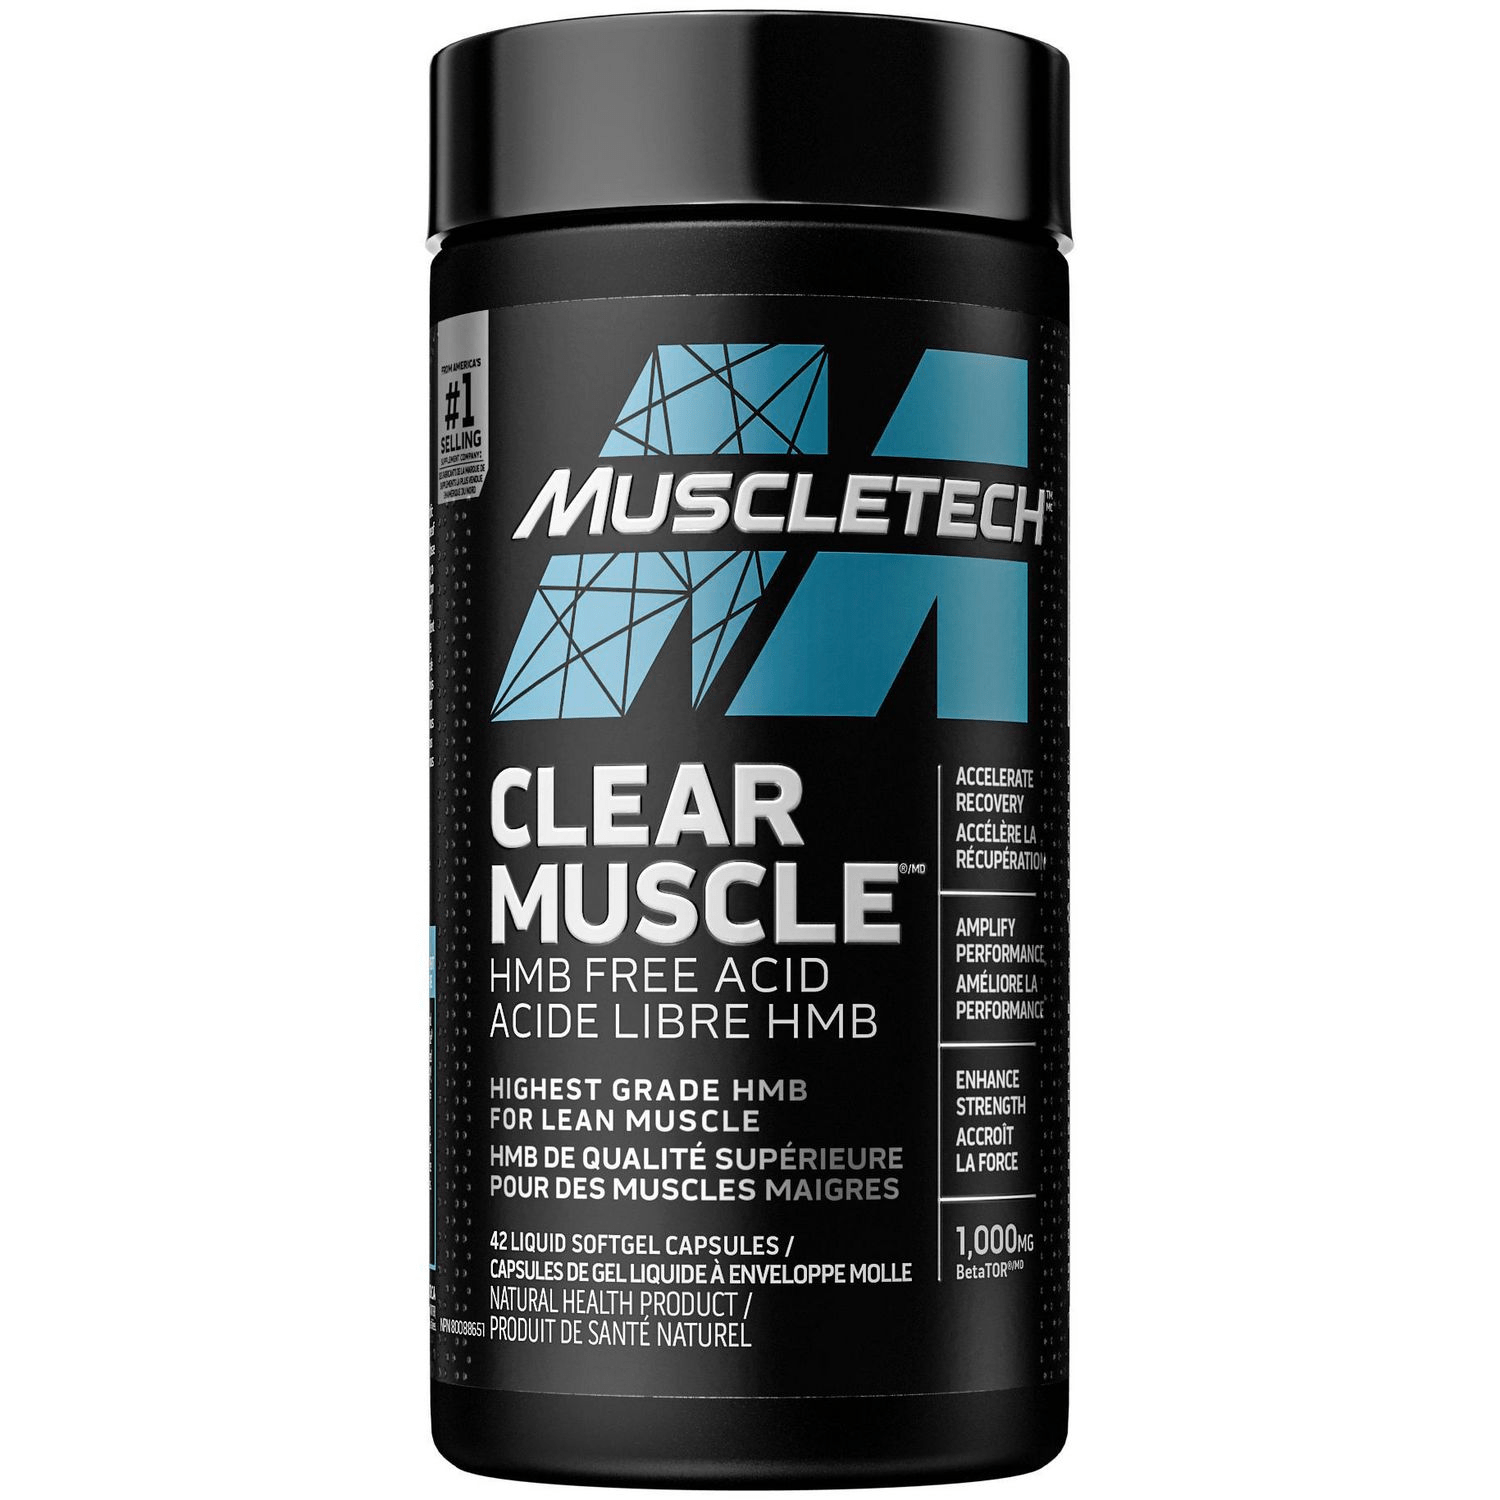 Muscletech Clear Muscle, 42caps | Muscle Builder and Recovery